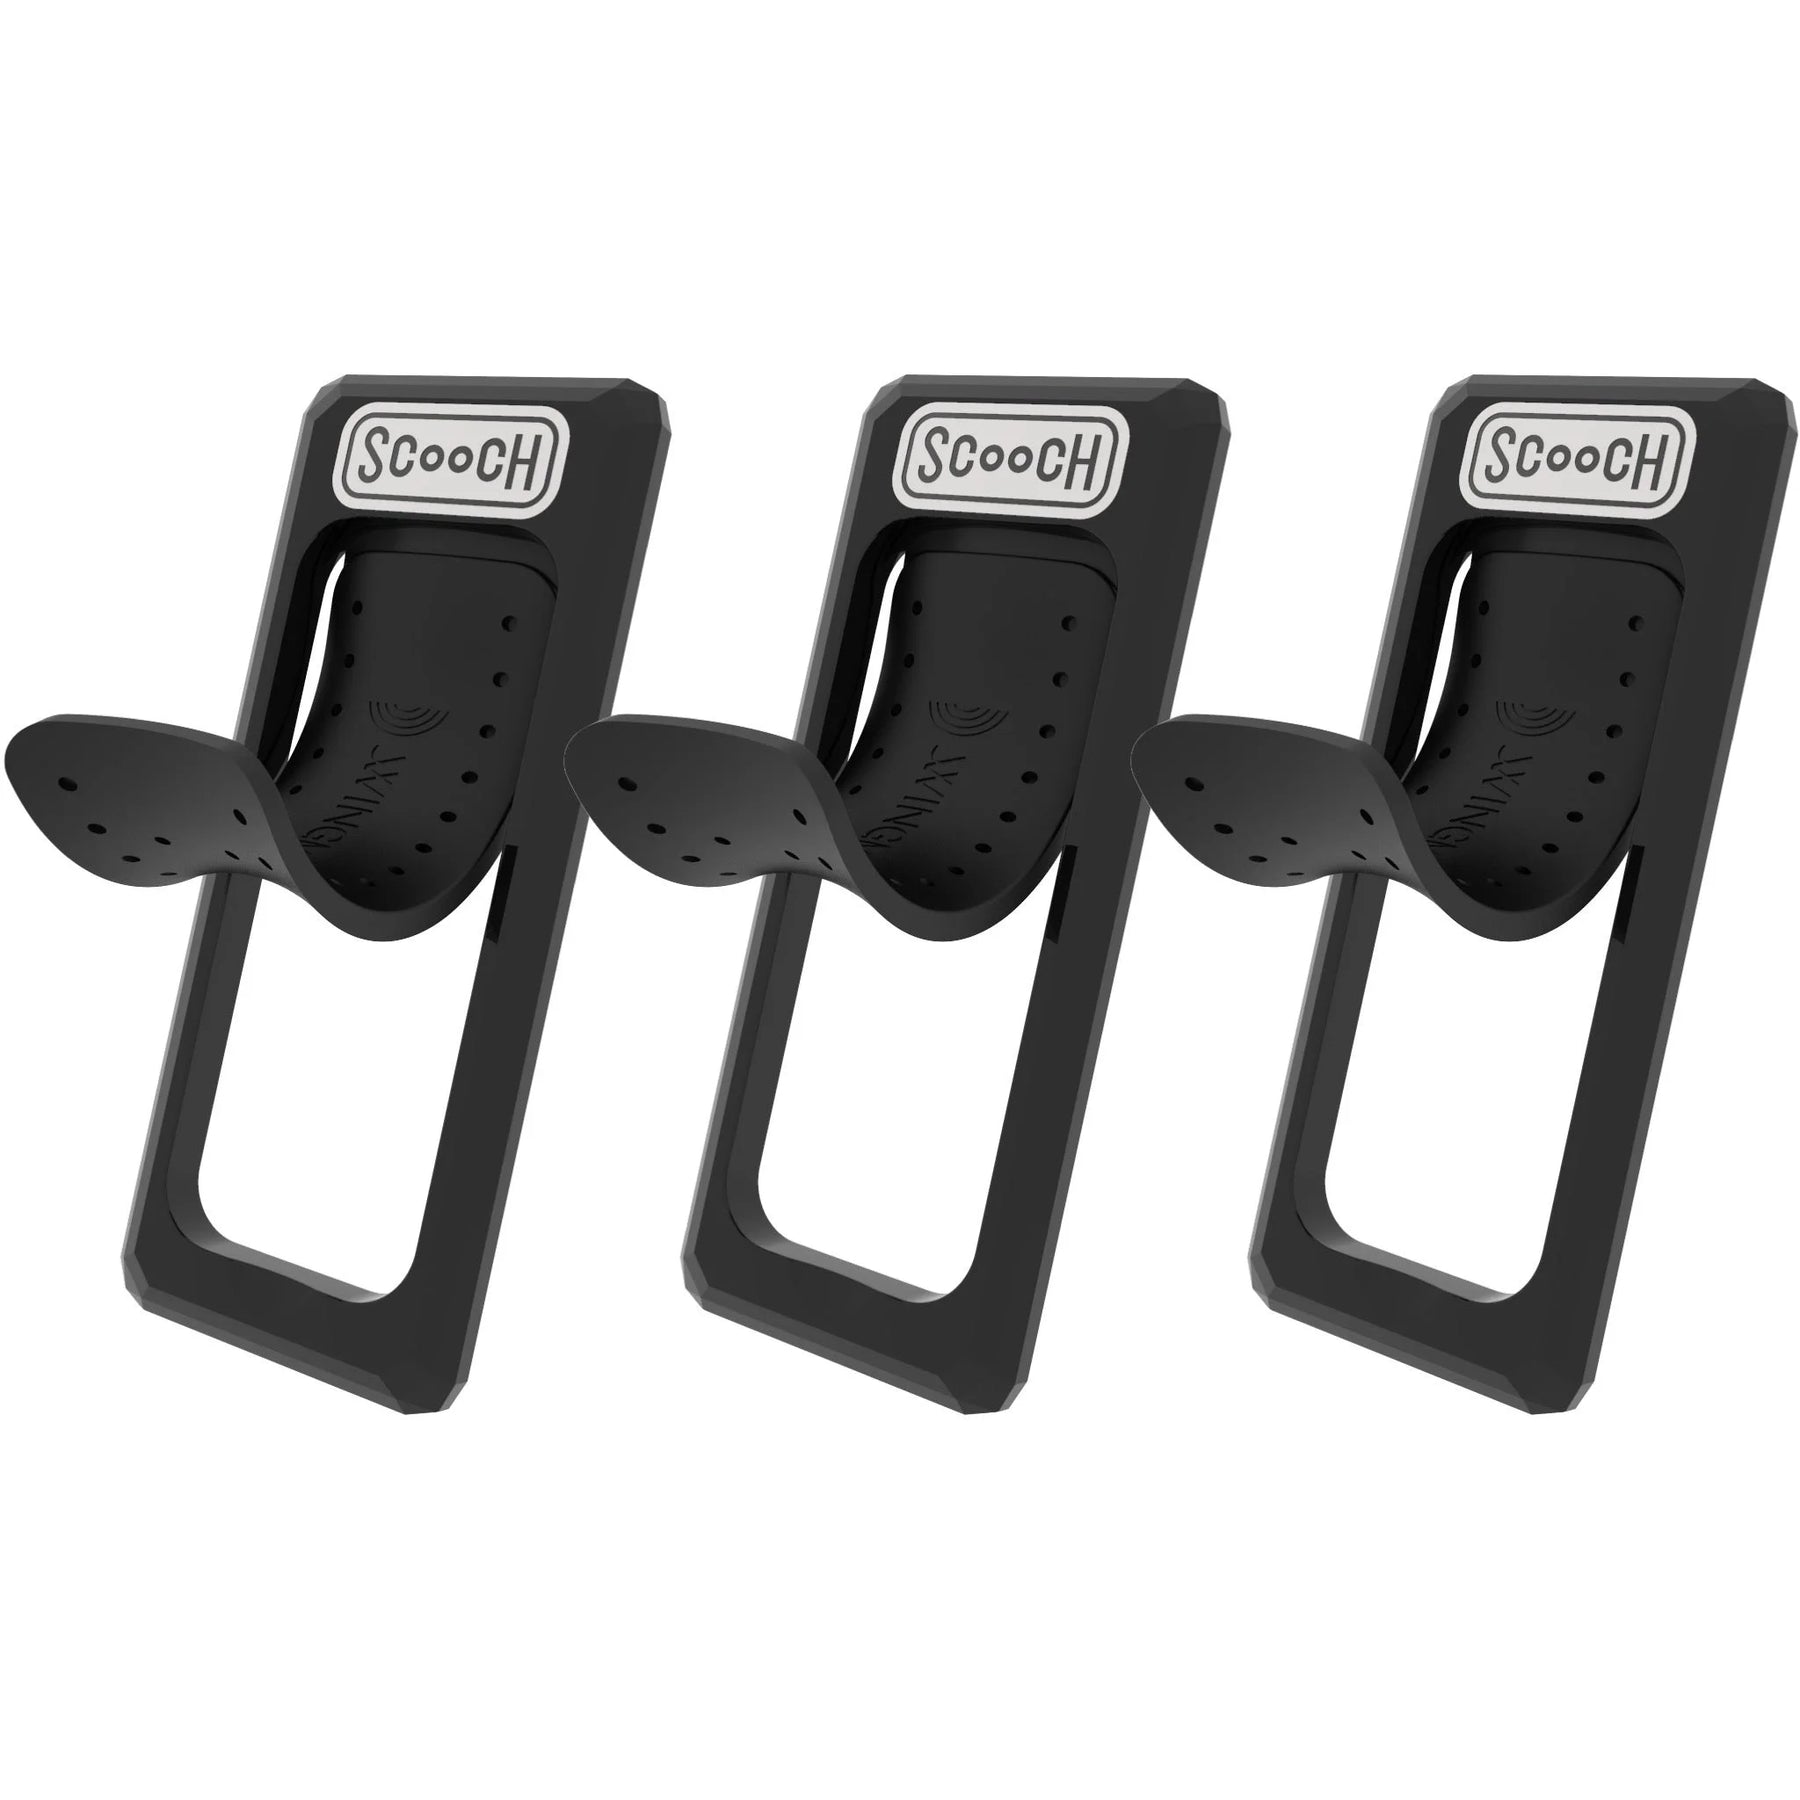 Fortress Scooch Scooch Wingback - Pop Out Kickstand & Grip for Any Phone Case Black-3-Pack-Save-20 Wingback 39.99